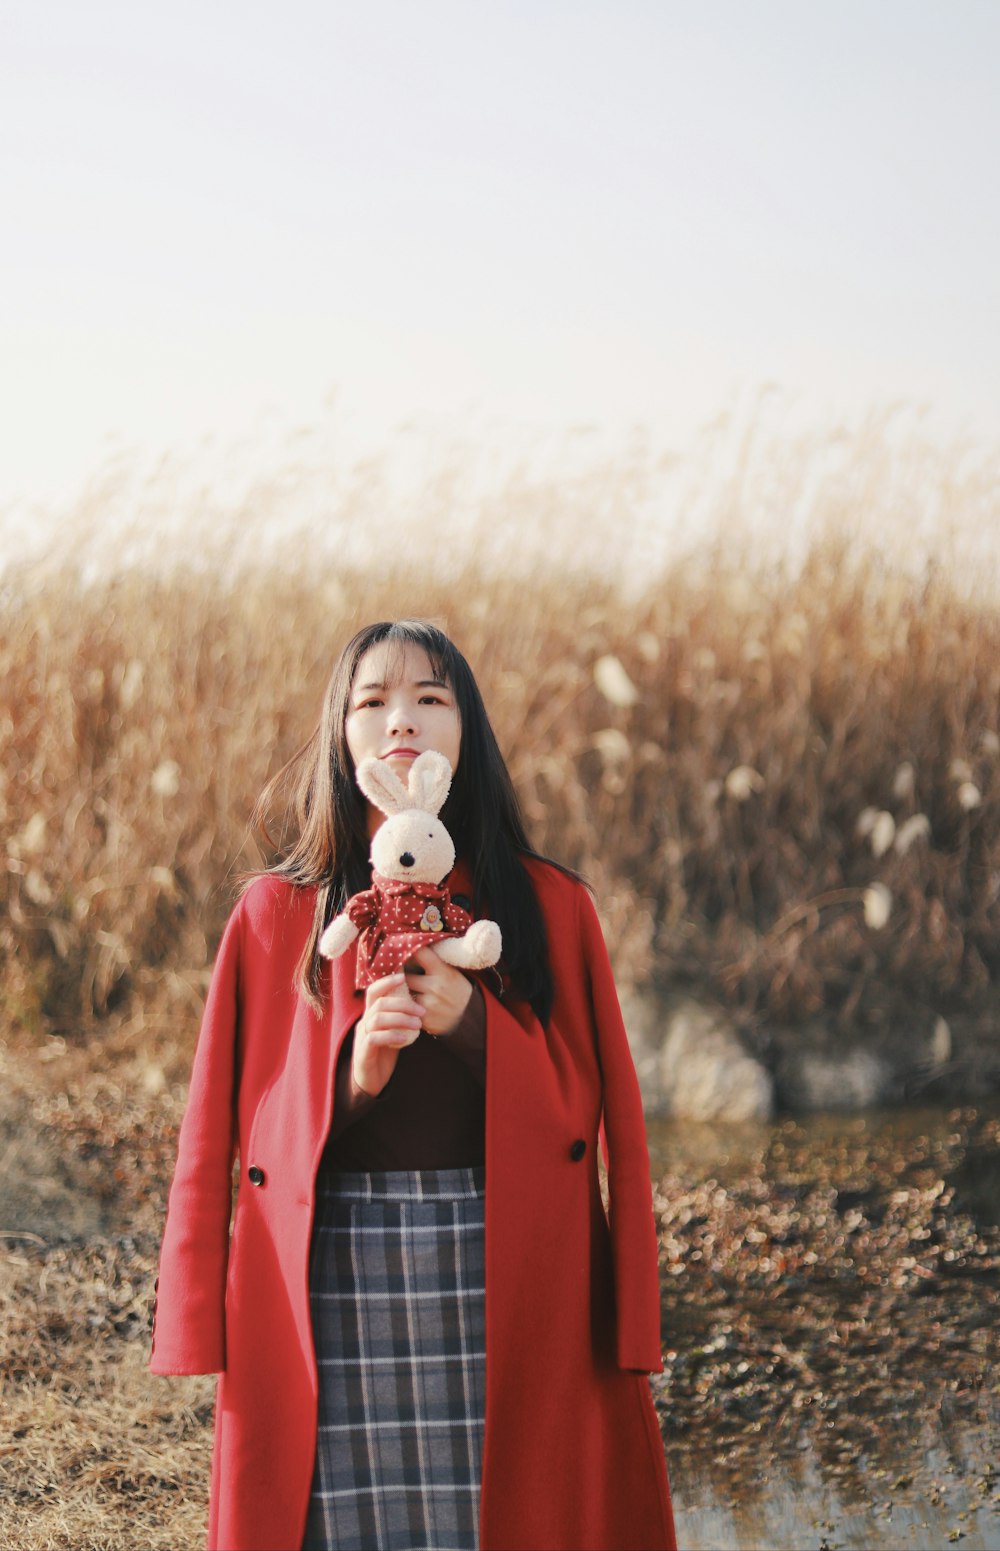 woman in red red coat holding rabbit plush toy